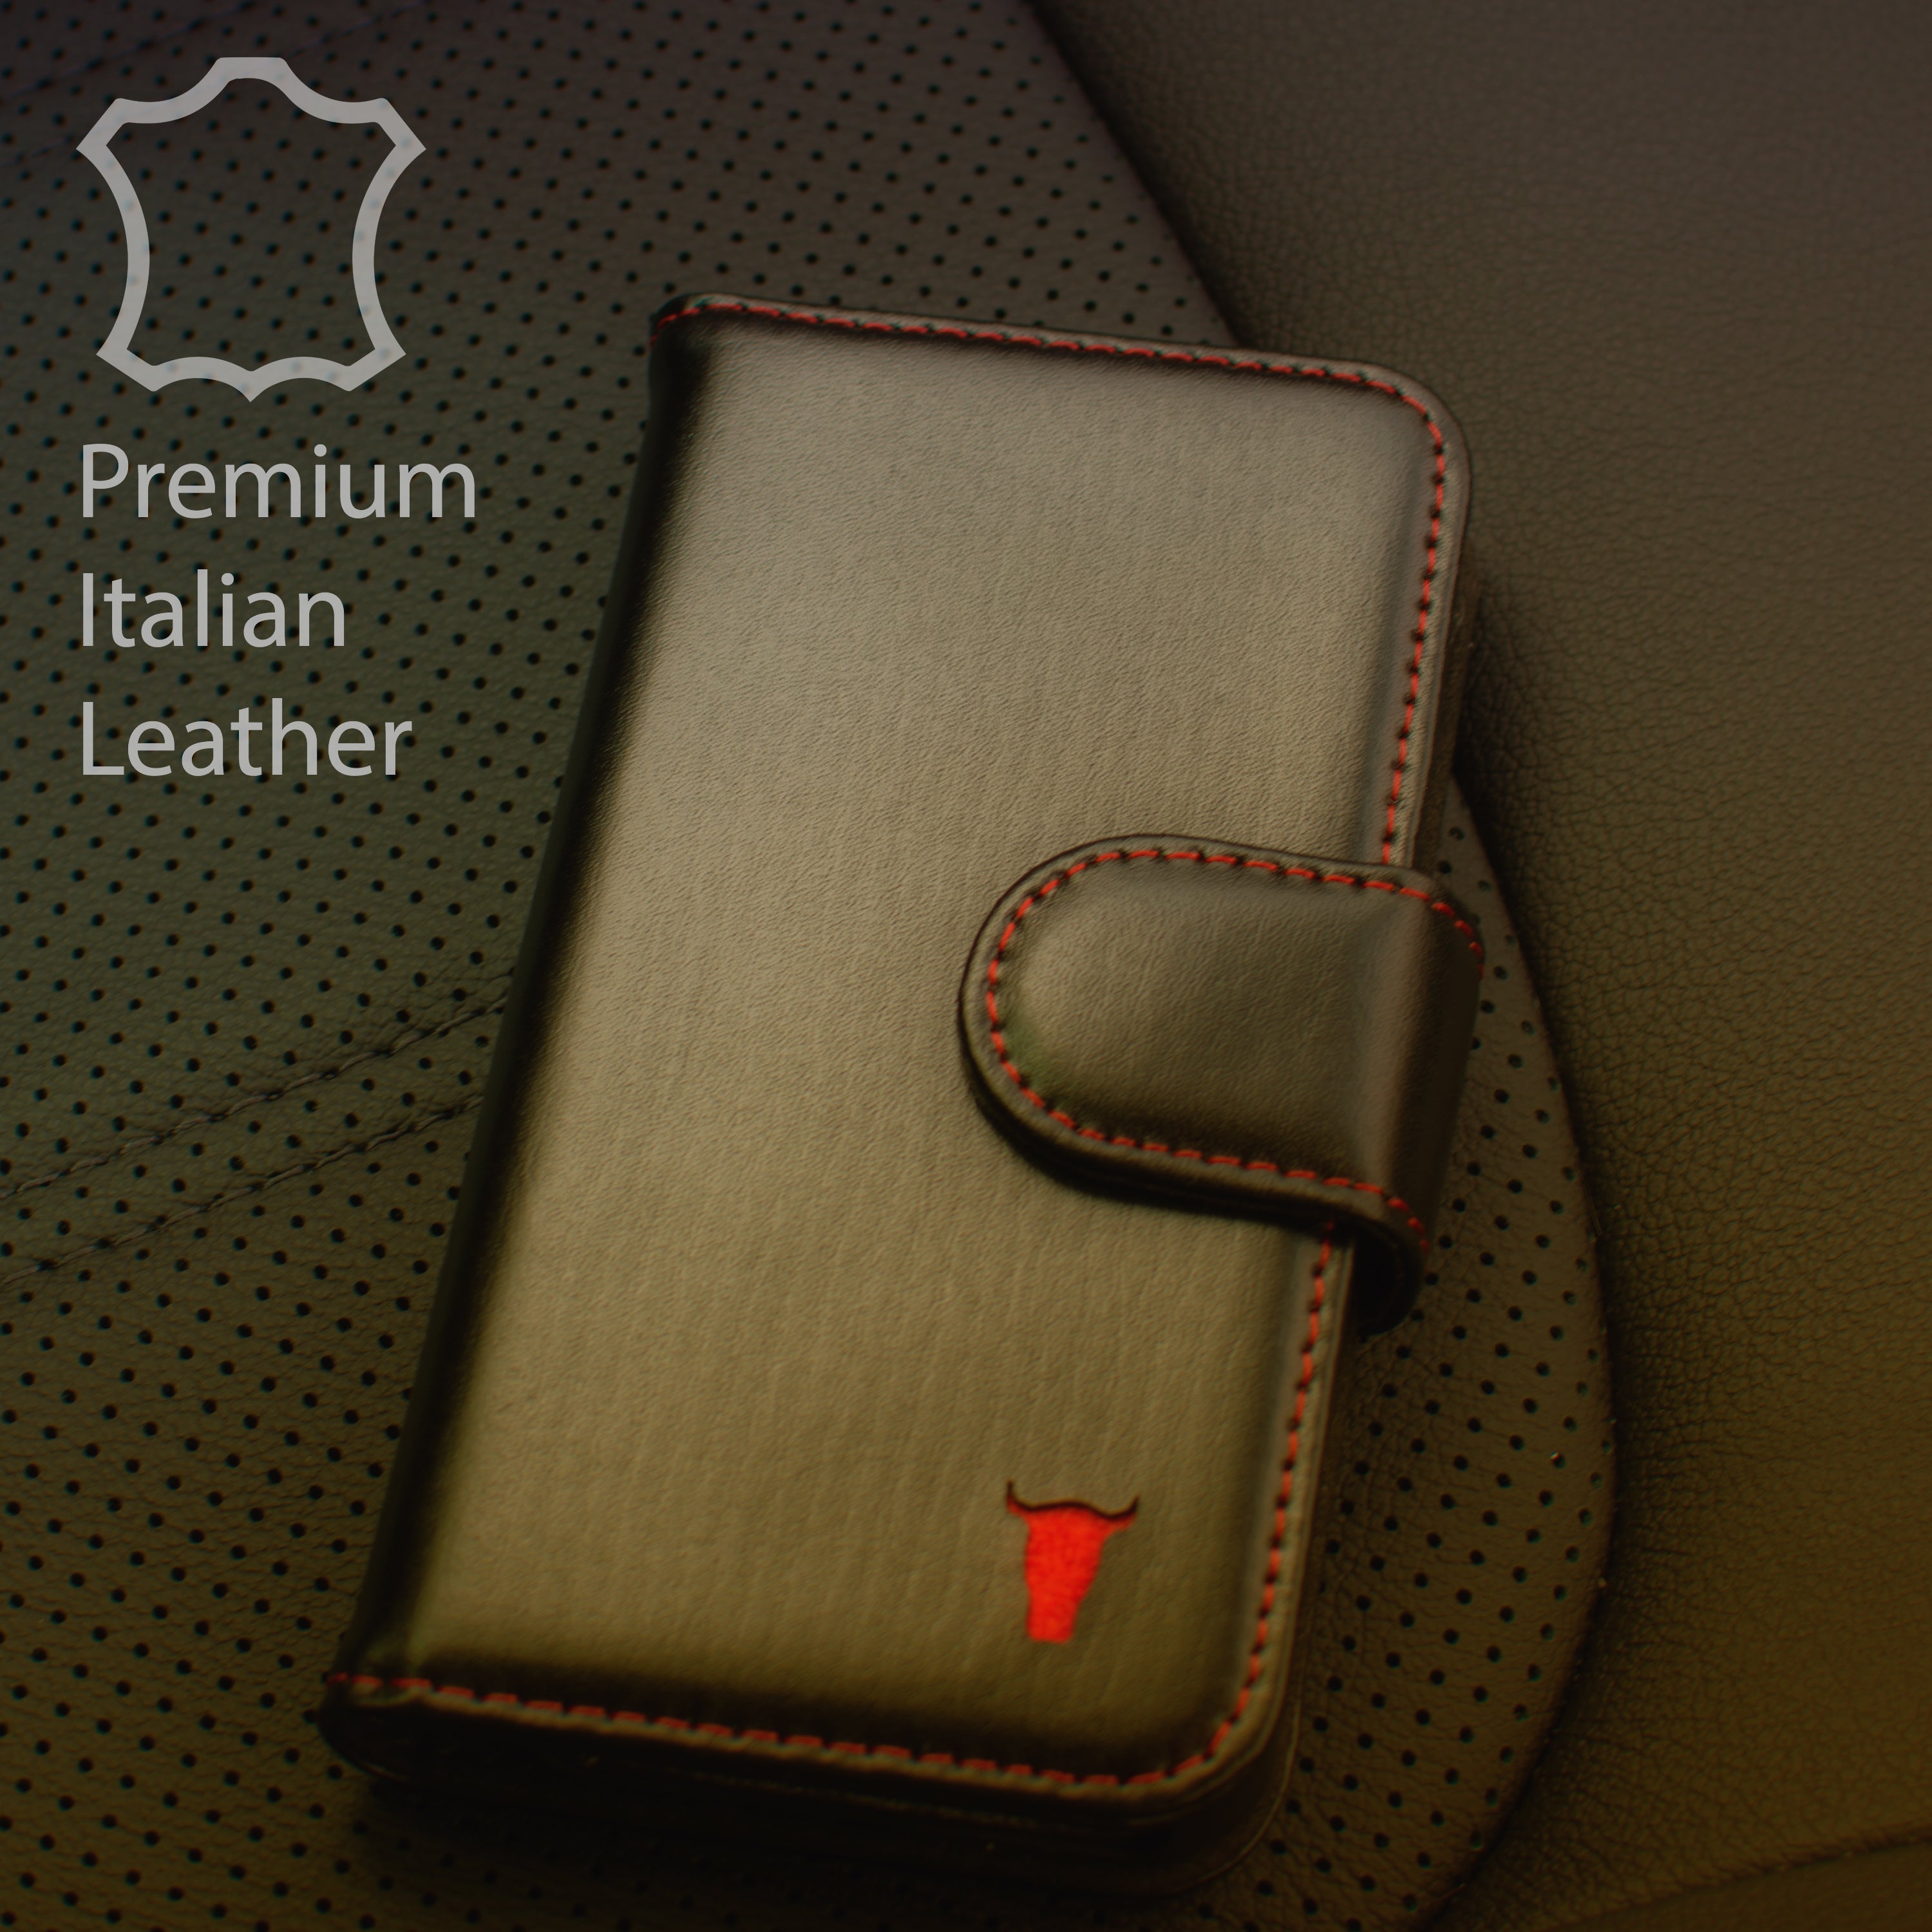 Premium Leather Wallet Case for HTC One M8 by TORRO